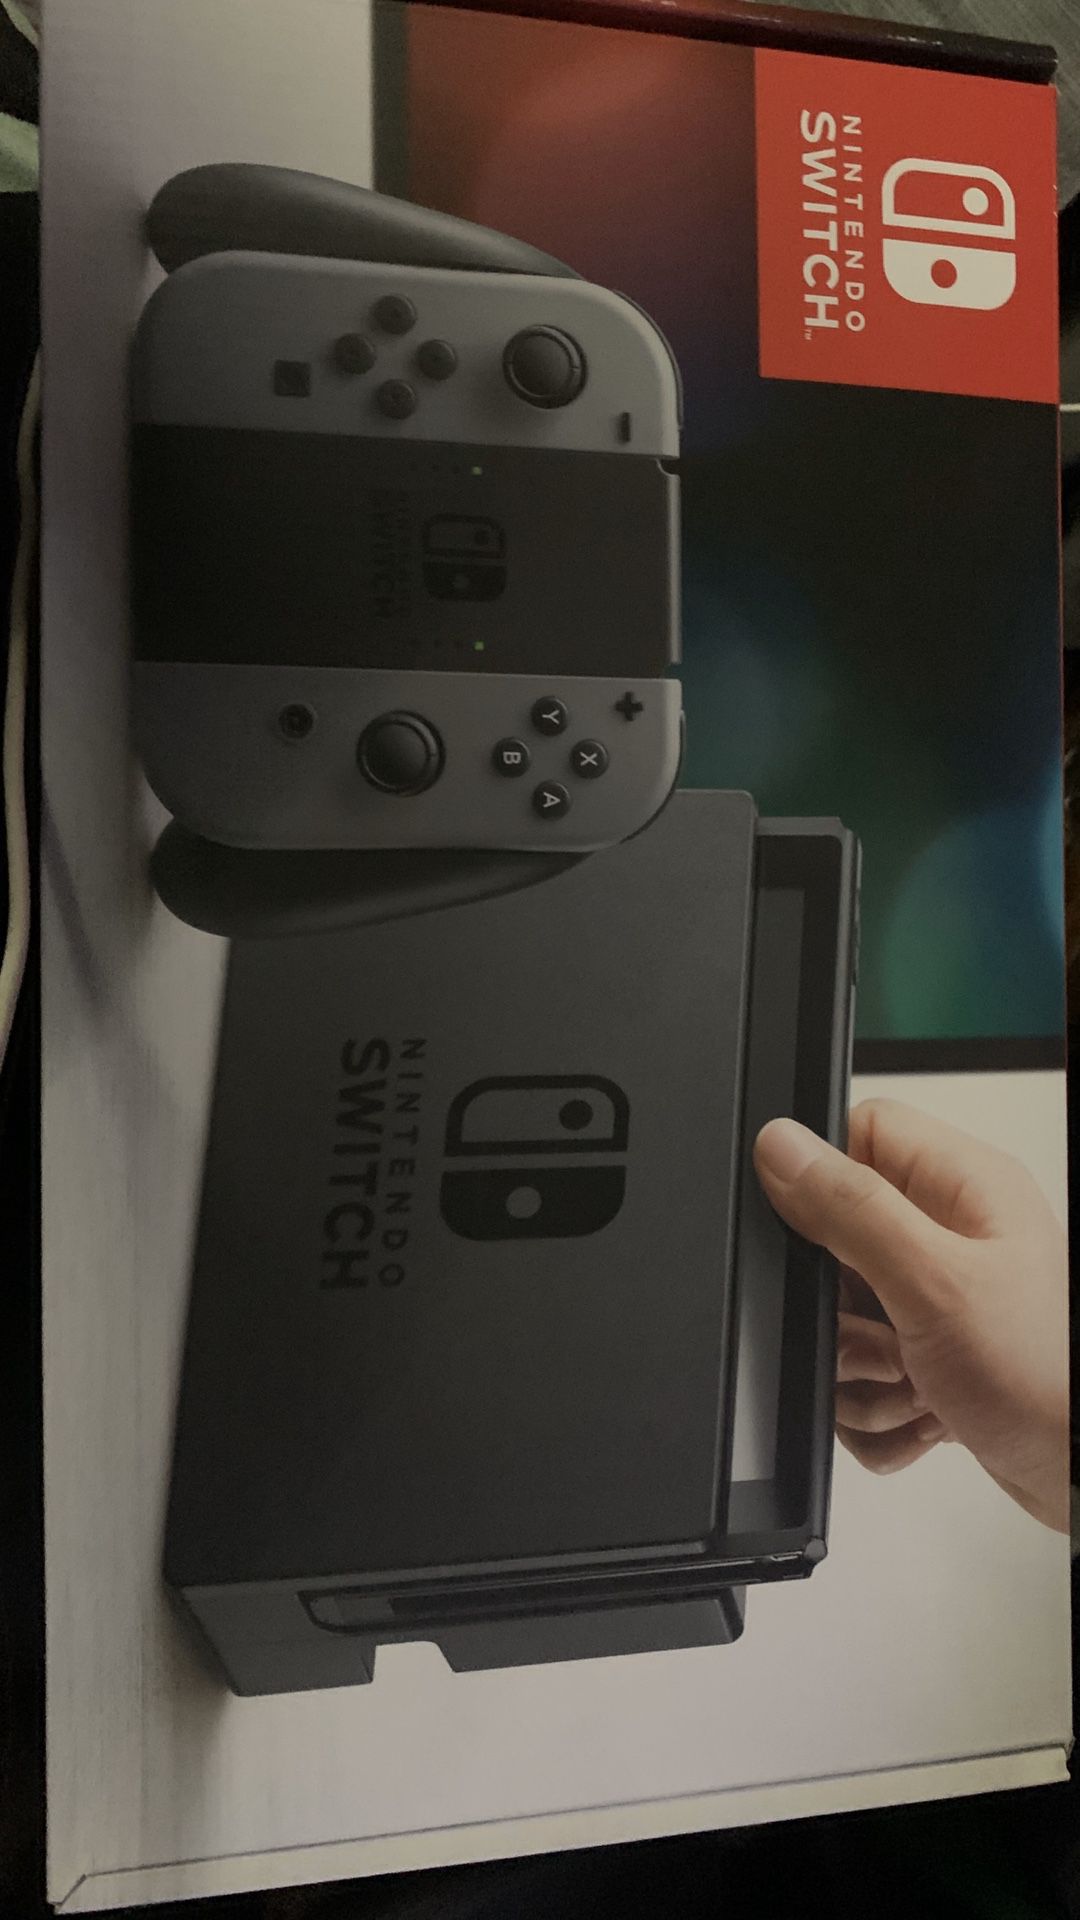 Nintendo Switch Brand New, Only Opened to Verify Contents.